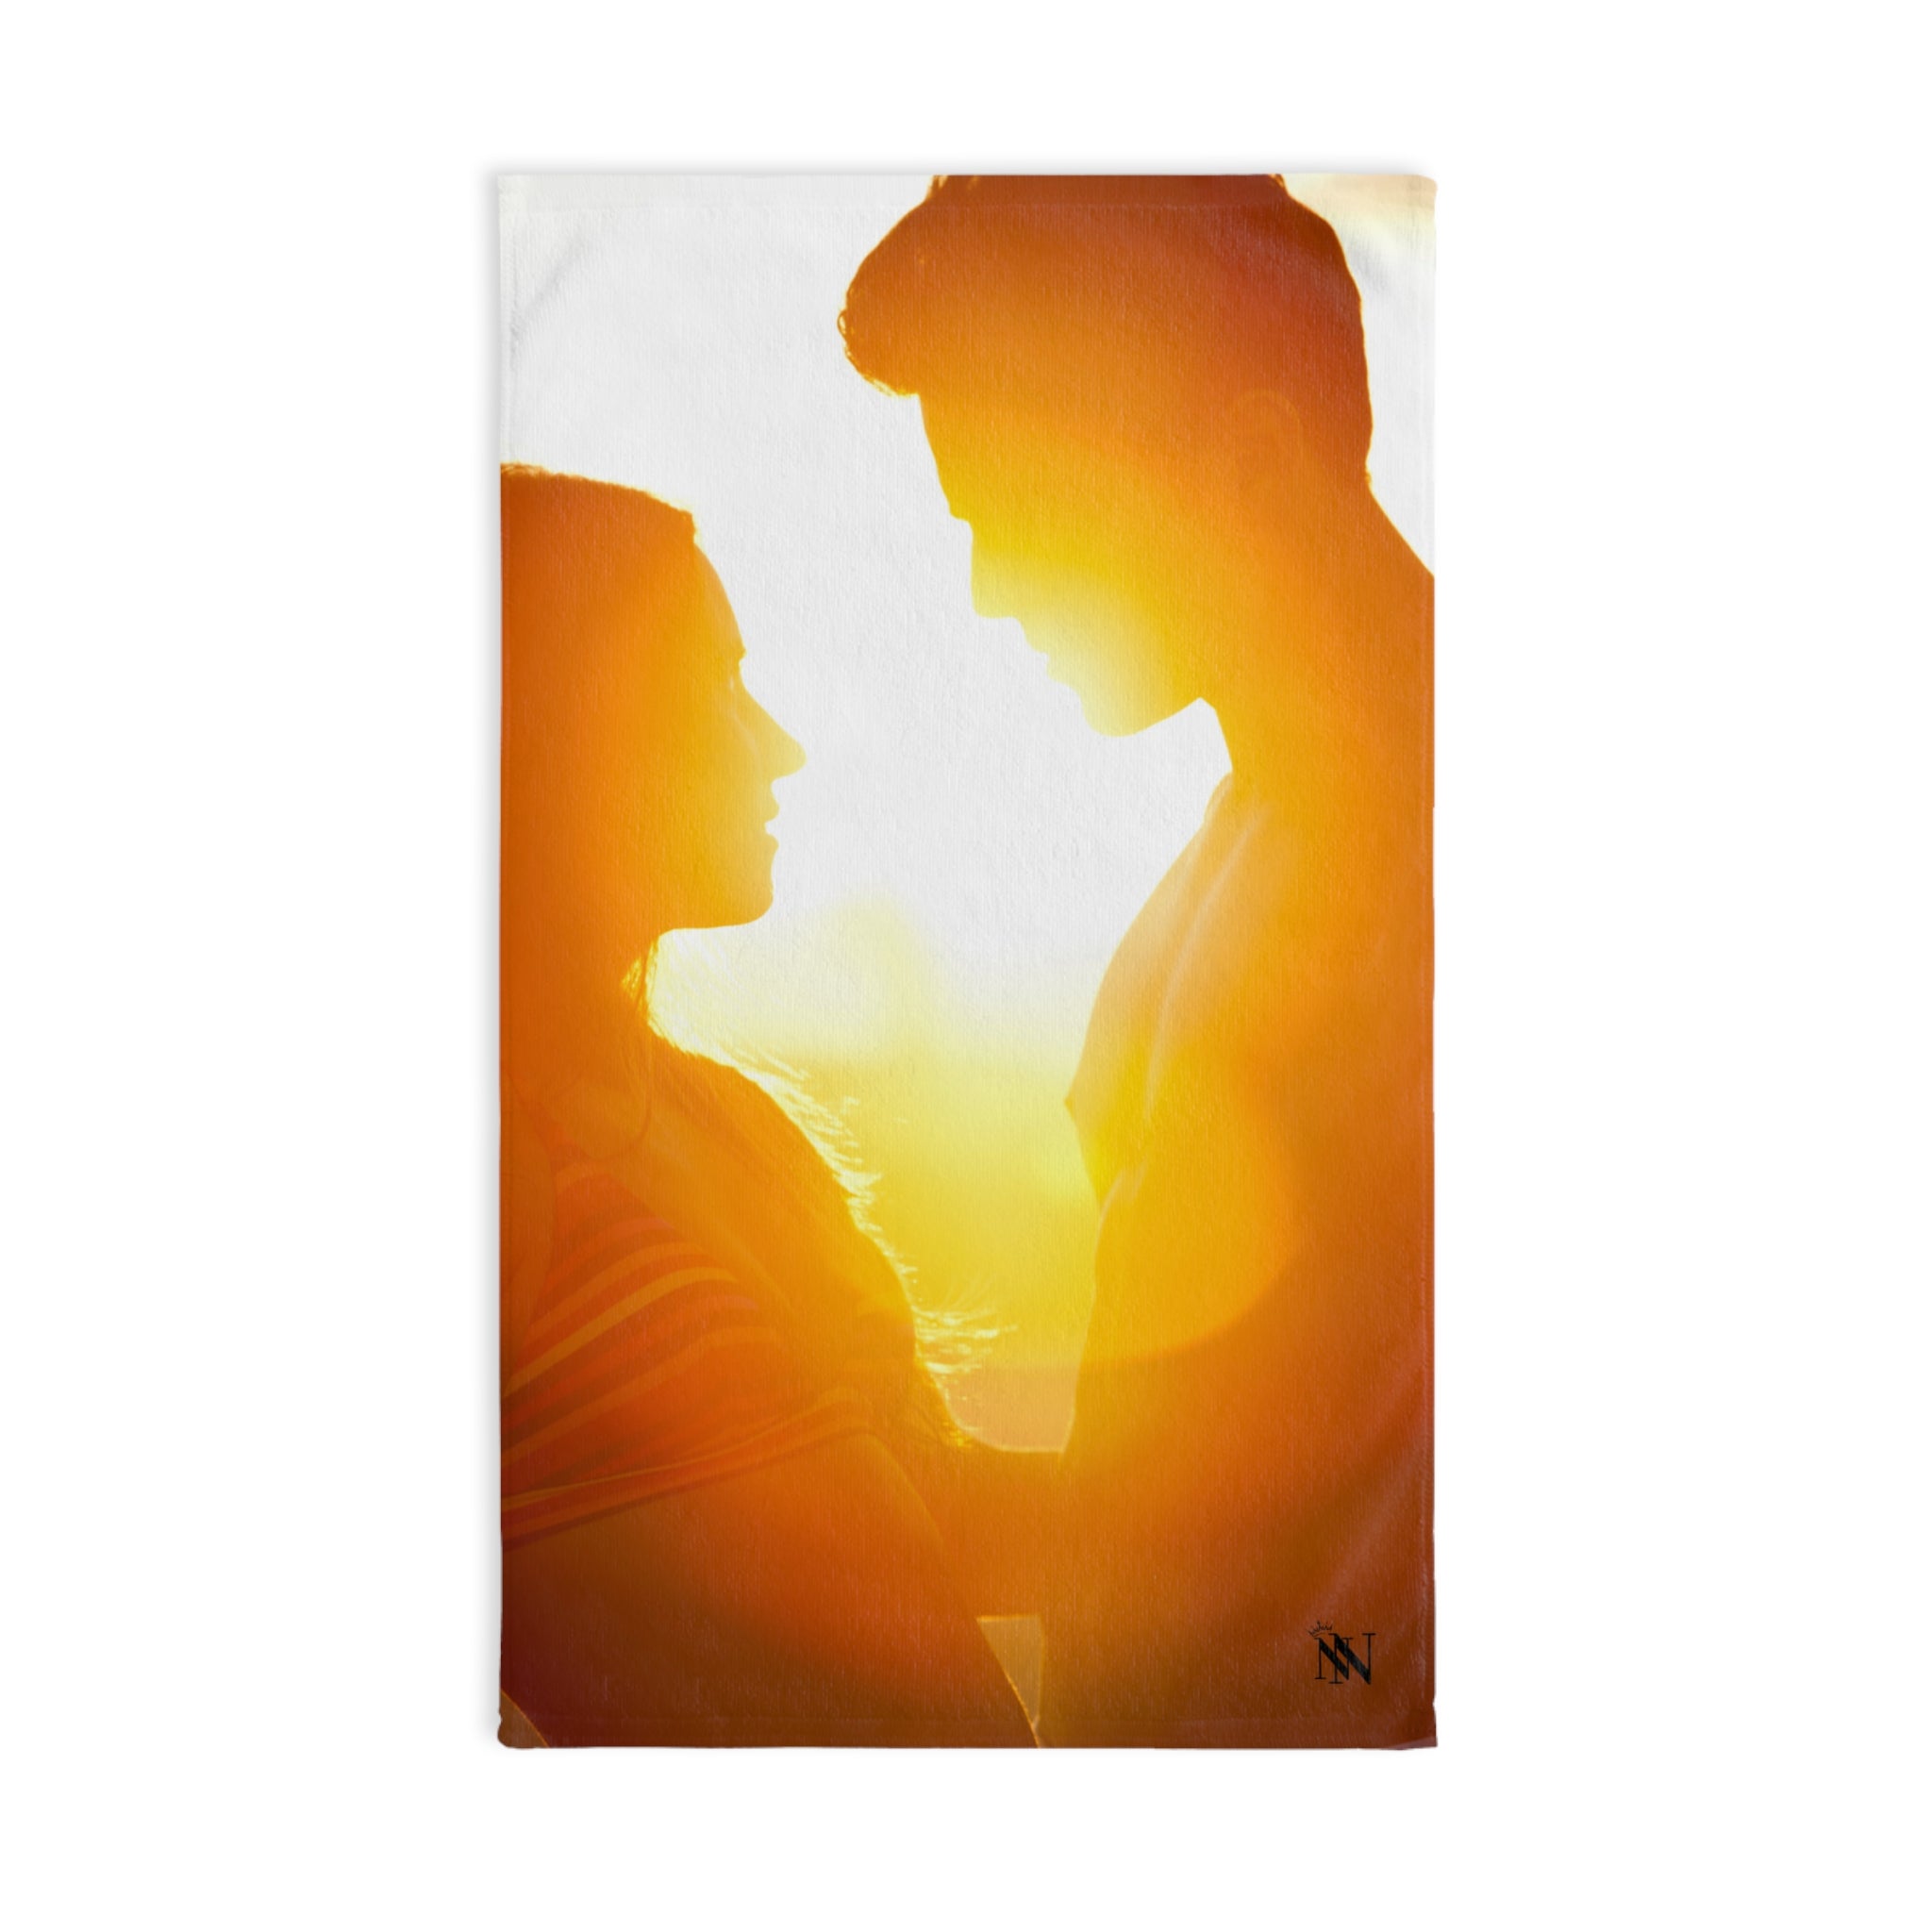 Couple Kiss Sunset 3D White | Funny Gifts for Men - Gifts for Him - Birthday Gifts for Men, Him, Her, Husband, Boyfriend, Girlfriend, New Couple Gifts, Fathers & Valentines Day Gifts, Christmas Gifts NECTAR NAPKINS